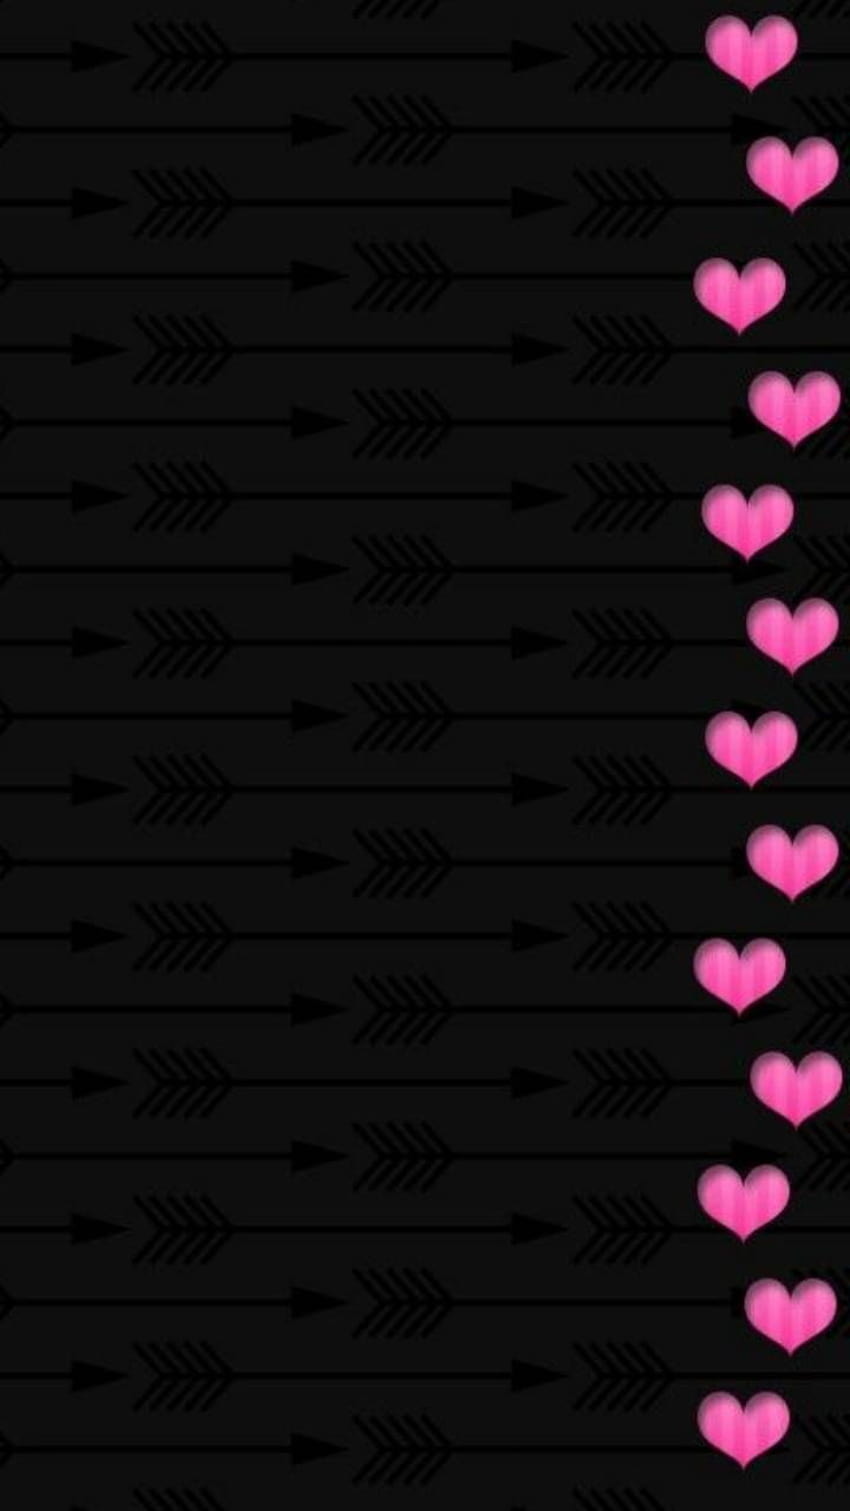 A bunch of pink hearts on a black background photo  Free Valentines day  Image on Unsplash